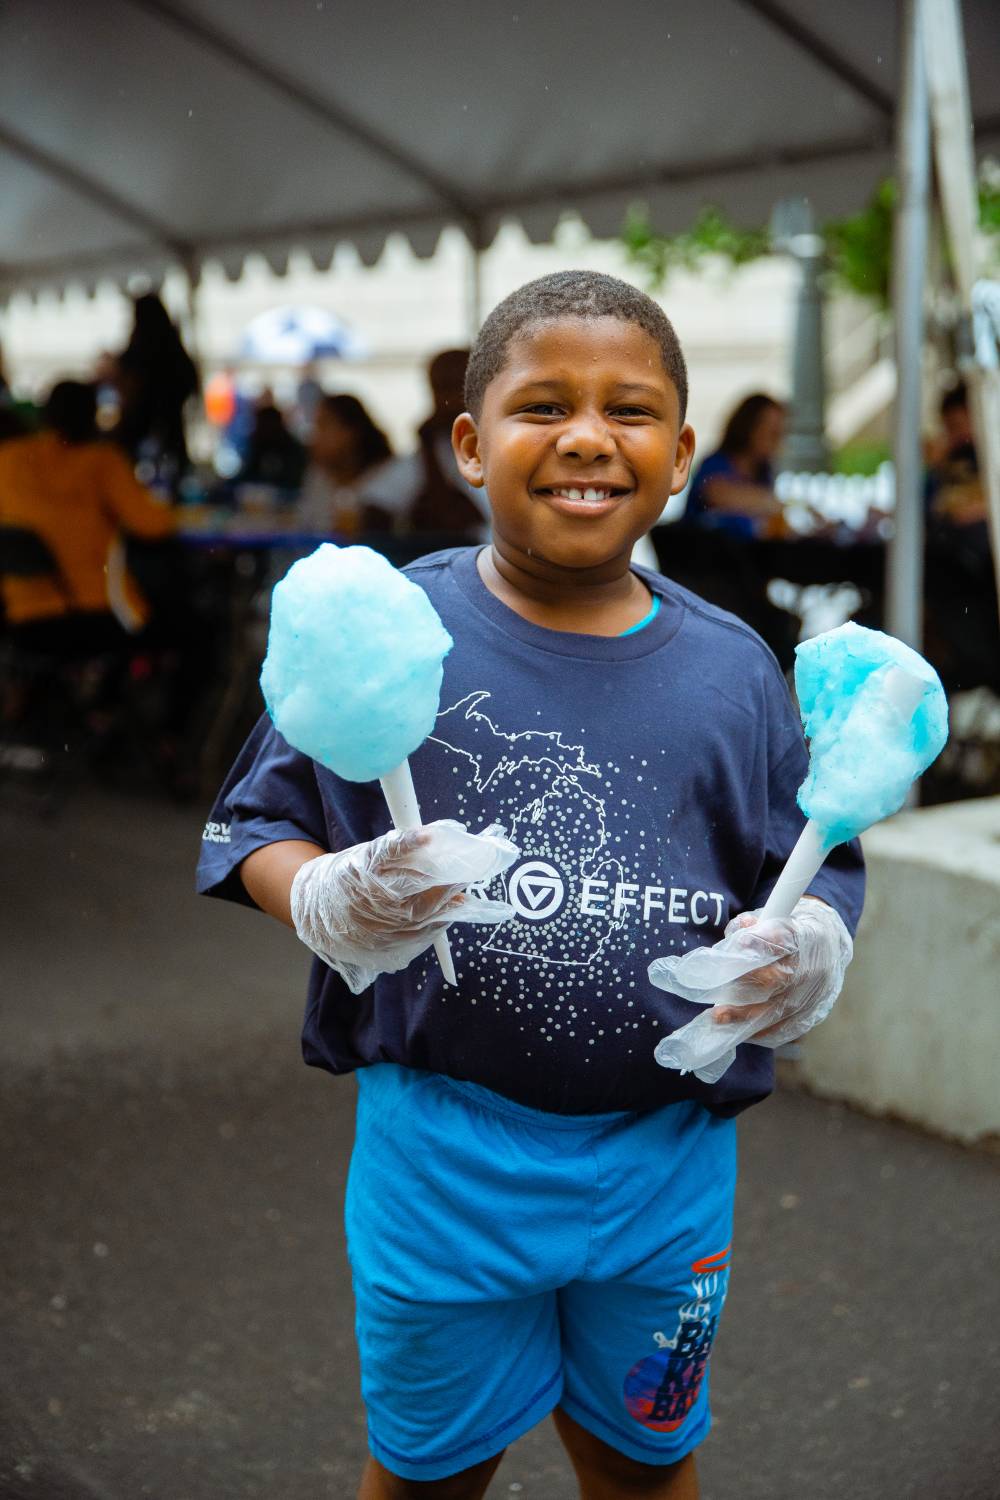 Boy with Laker Effect shirt on holding cotton candy